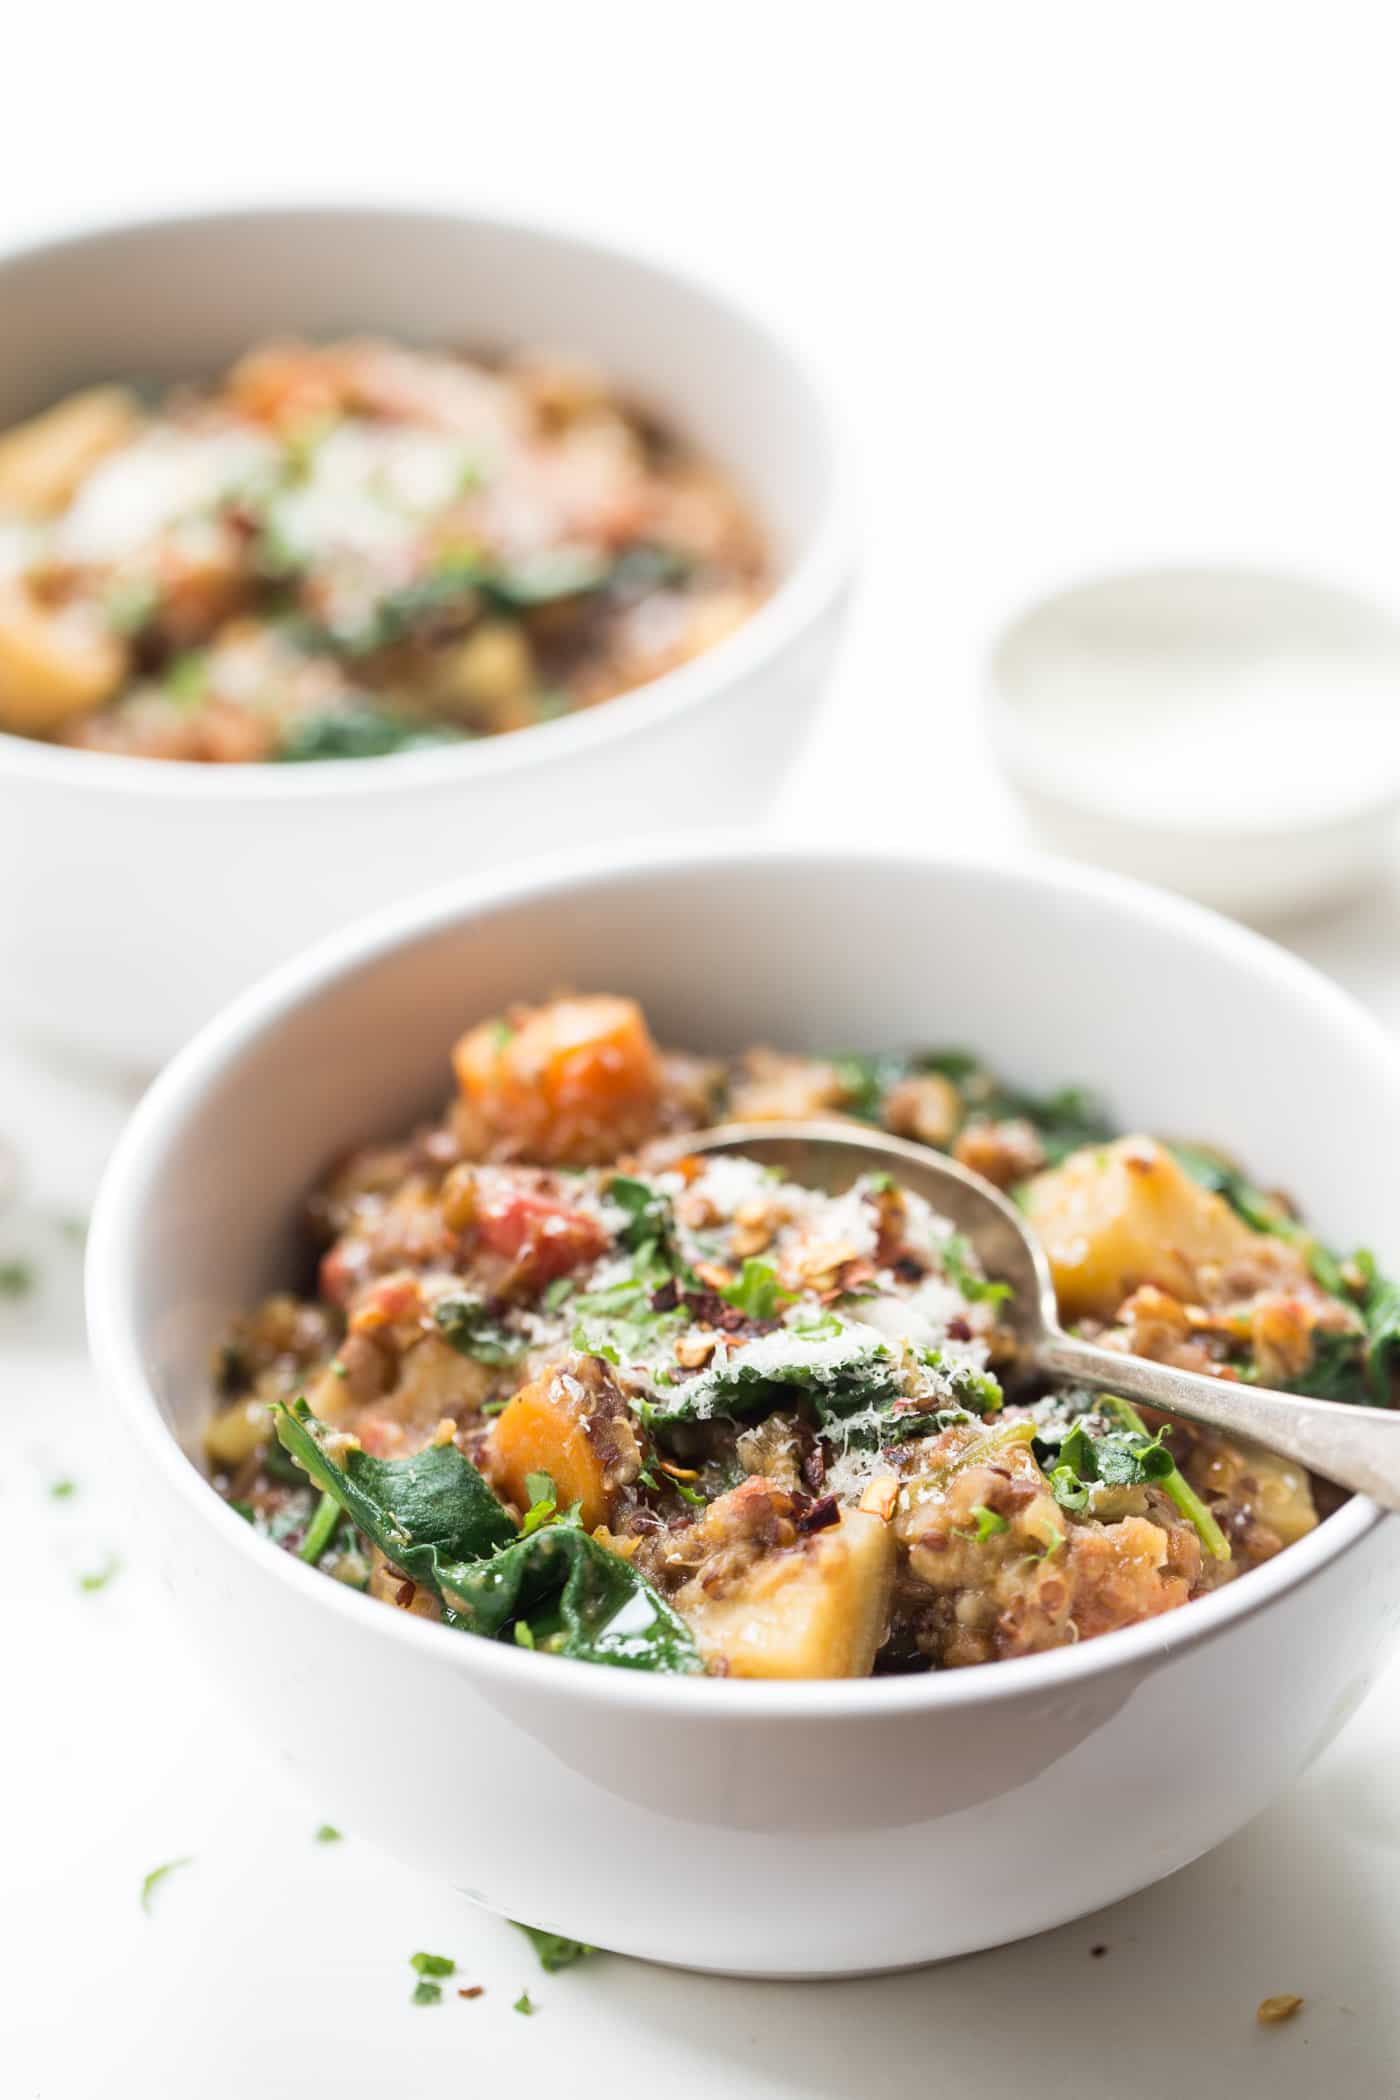 Root Veggie & Lentil Quinoa Stew made in just ONE POT with healthy, wholesome ingredients!